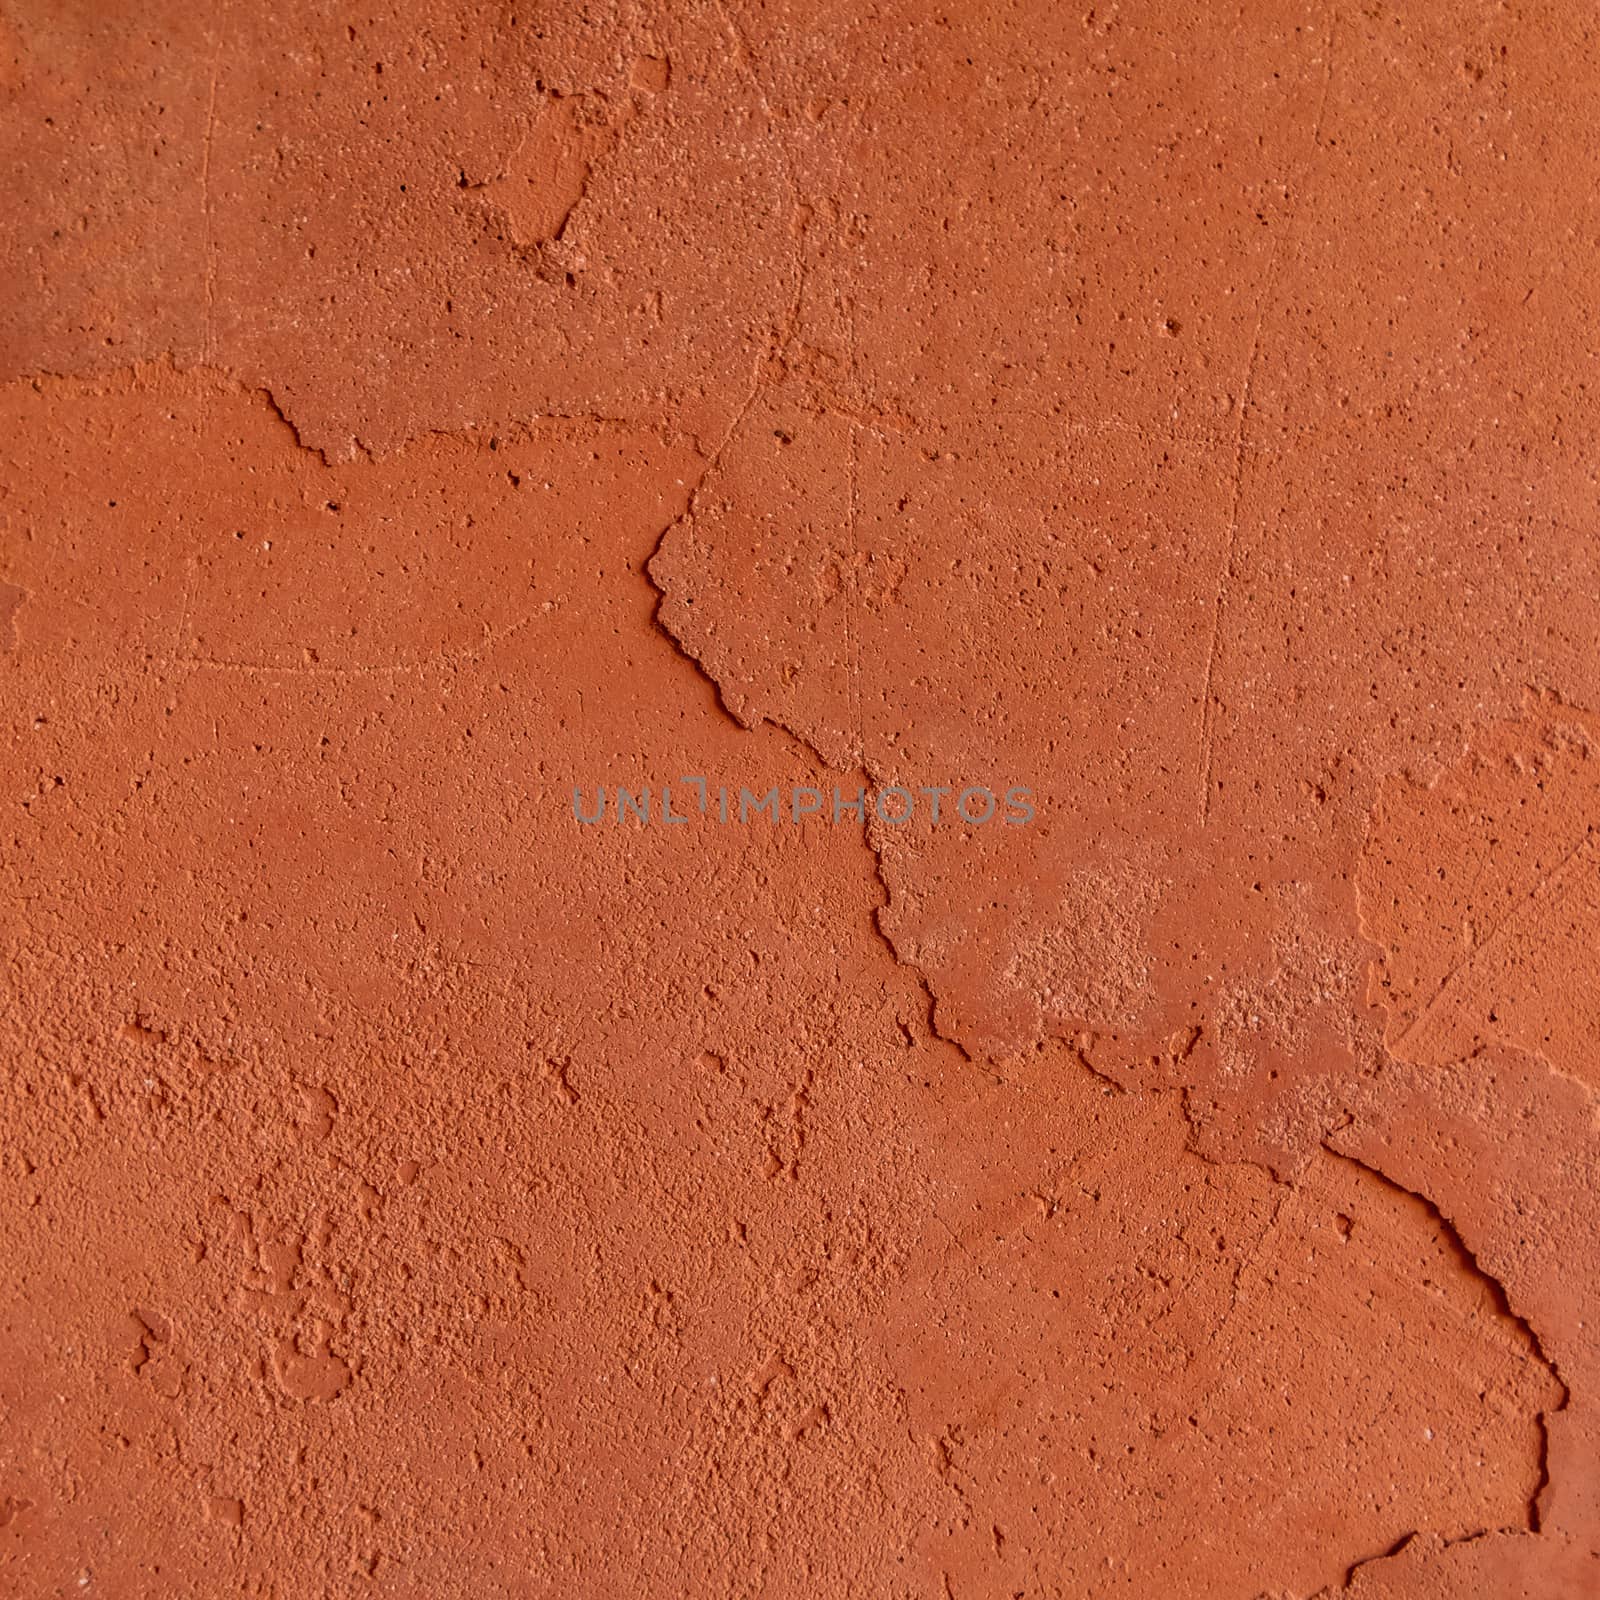 Red rough stone texture background. Material construction and architectural detail.